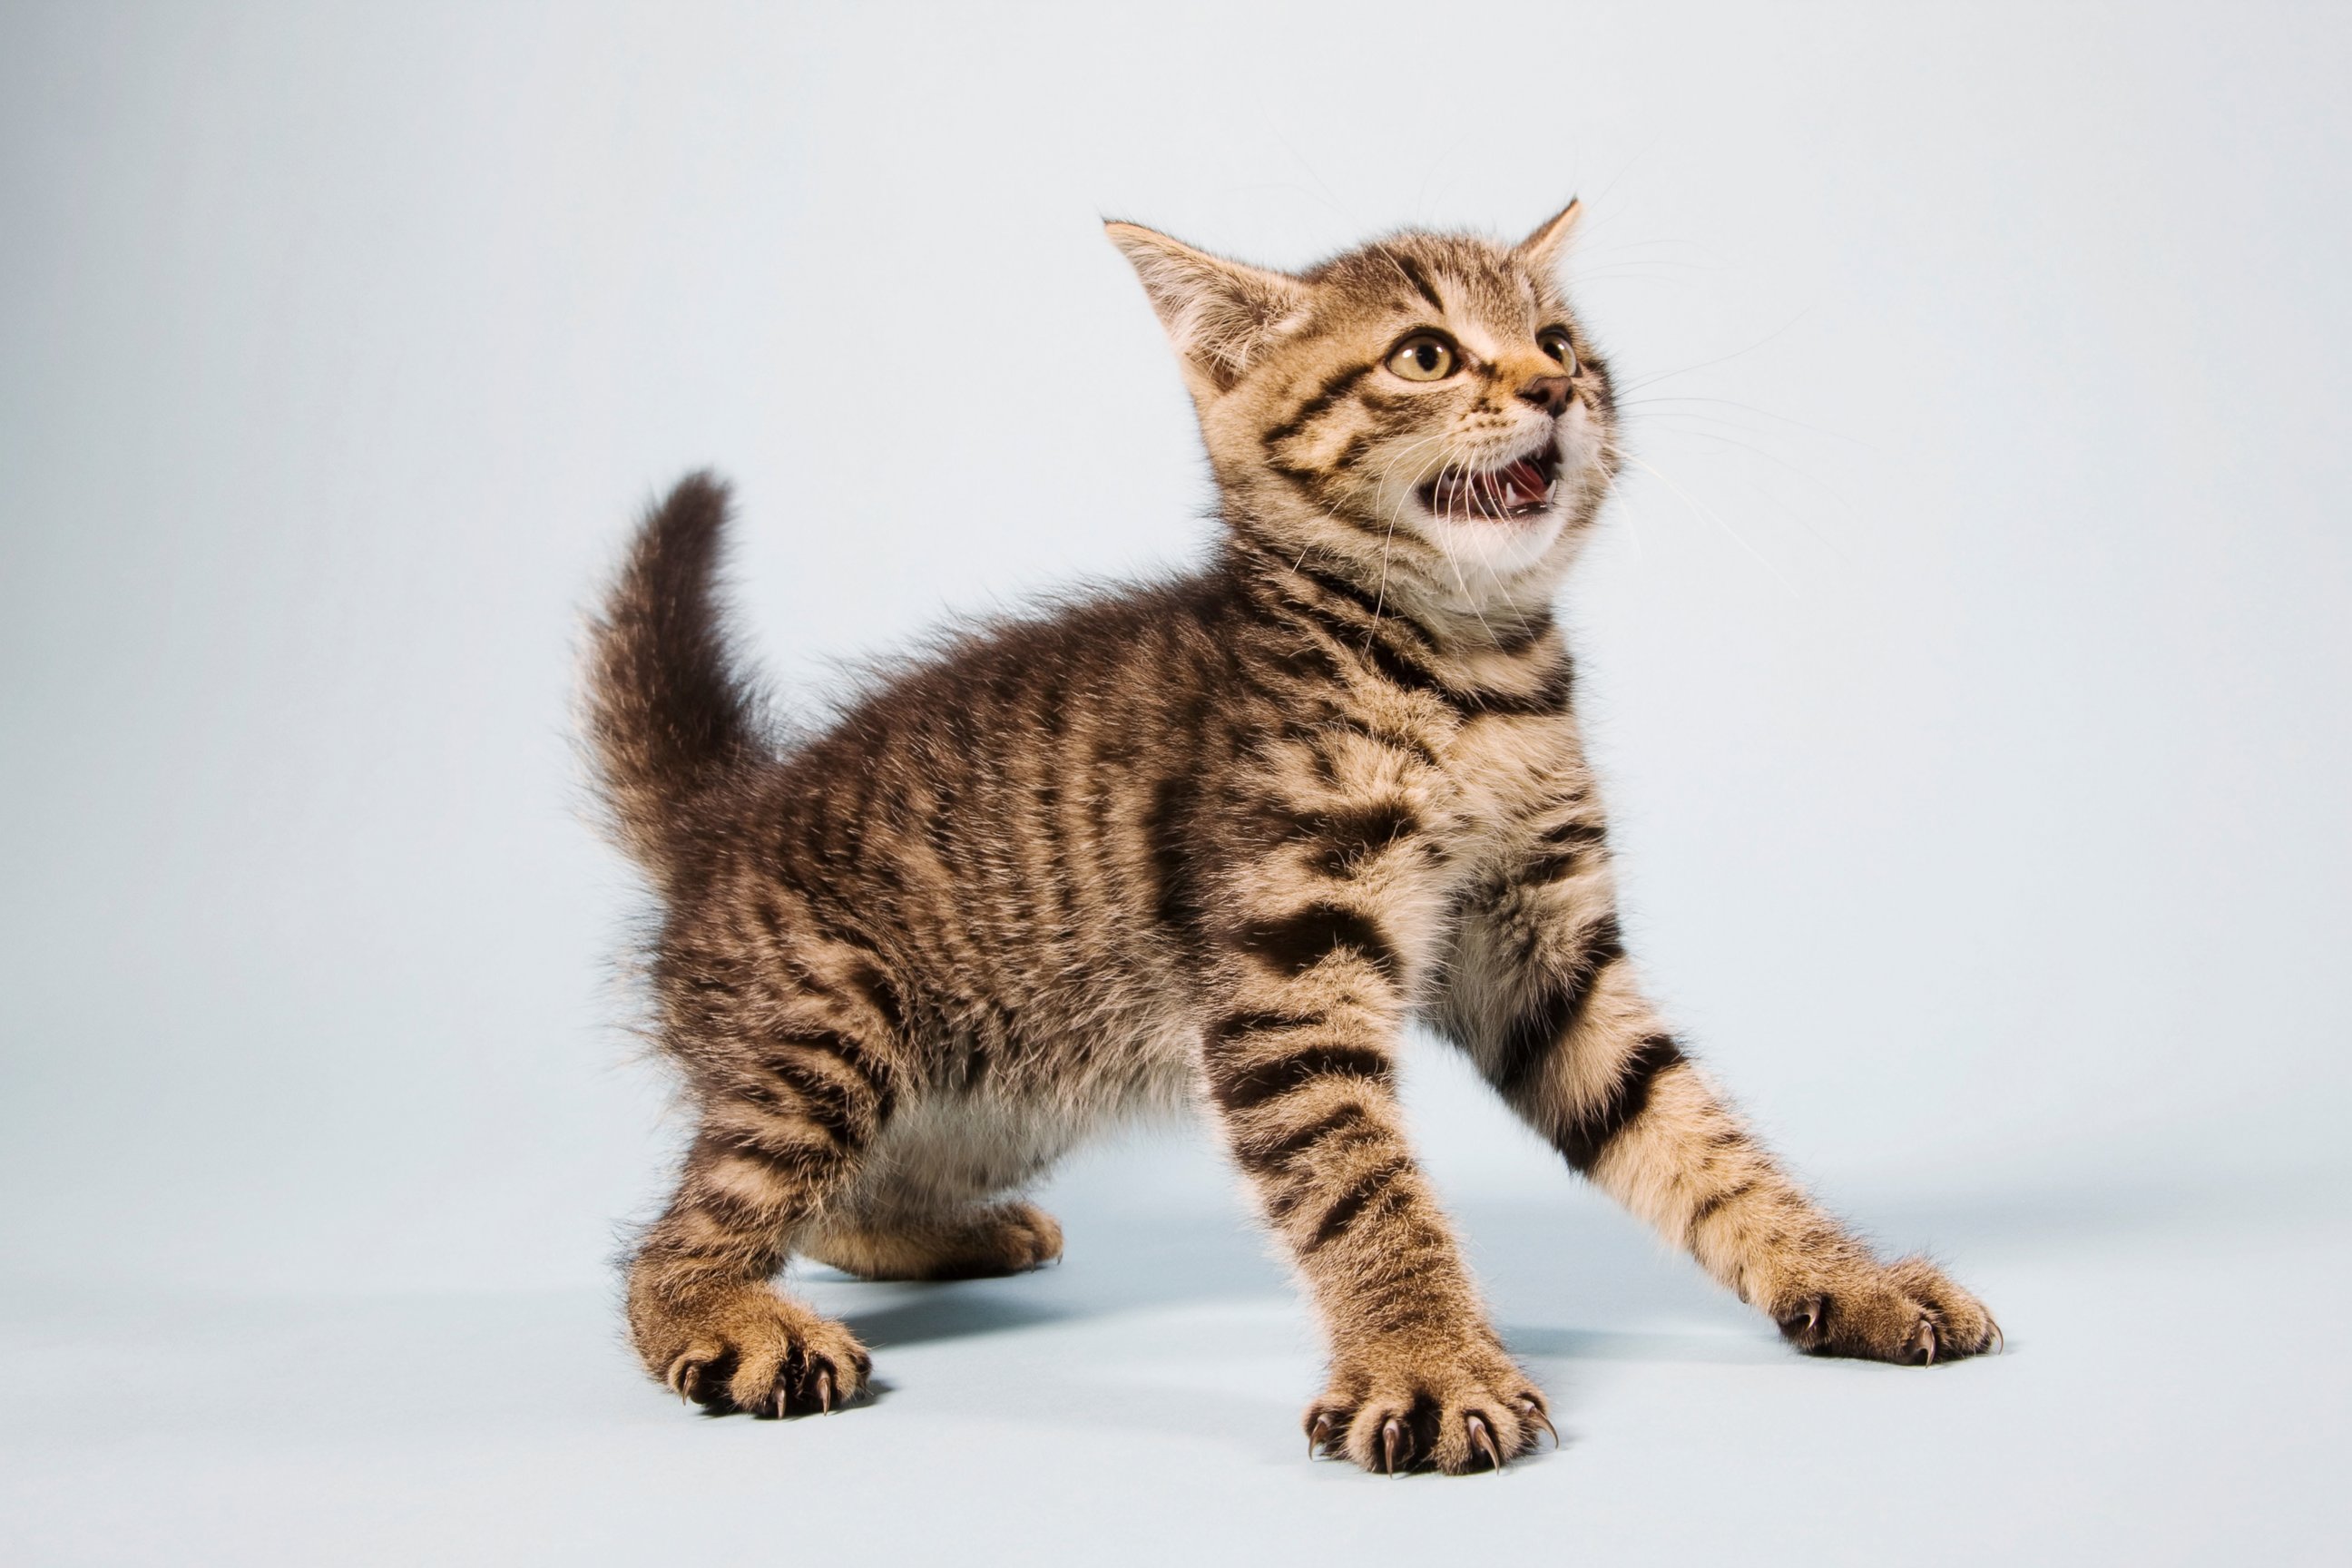 PHOTO: A scared kitten is pictured in this undated stock photo.